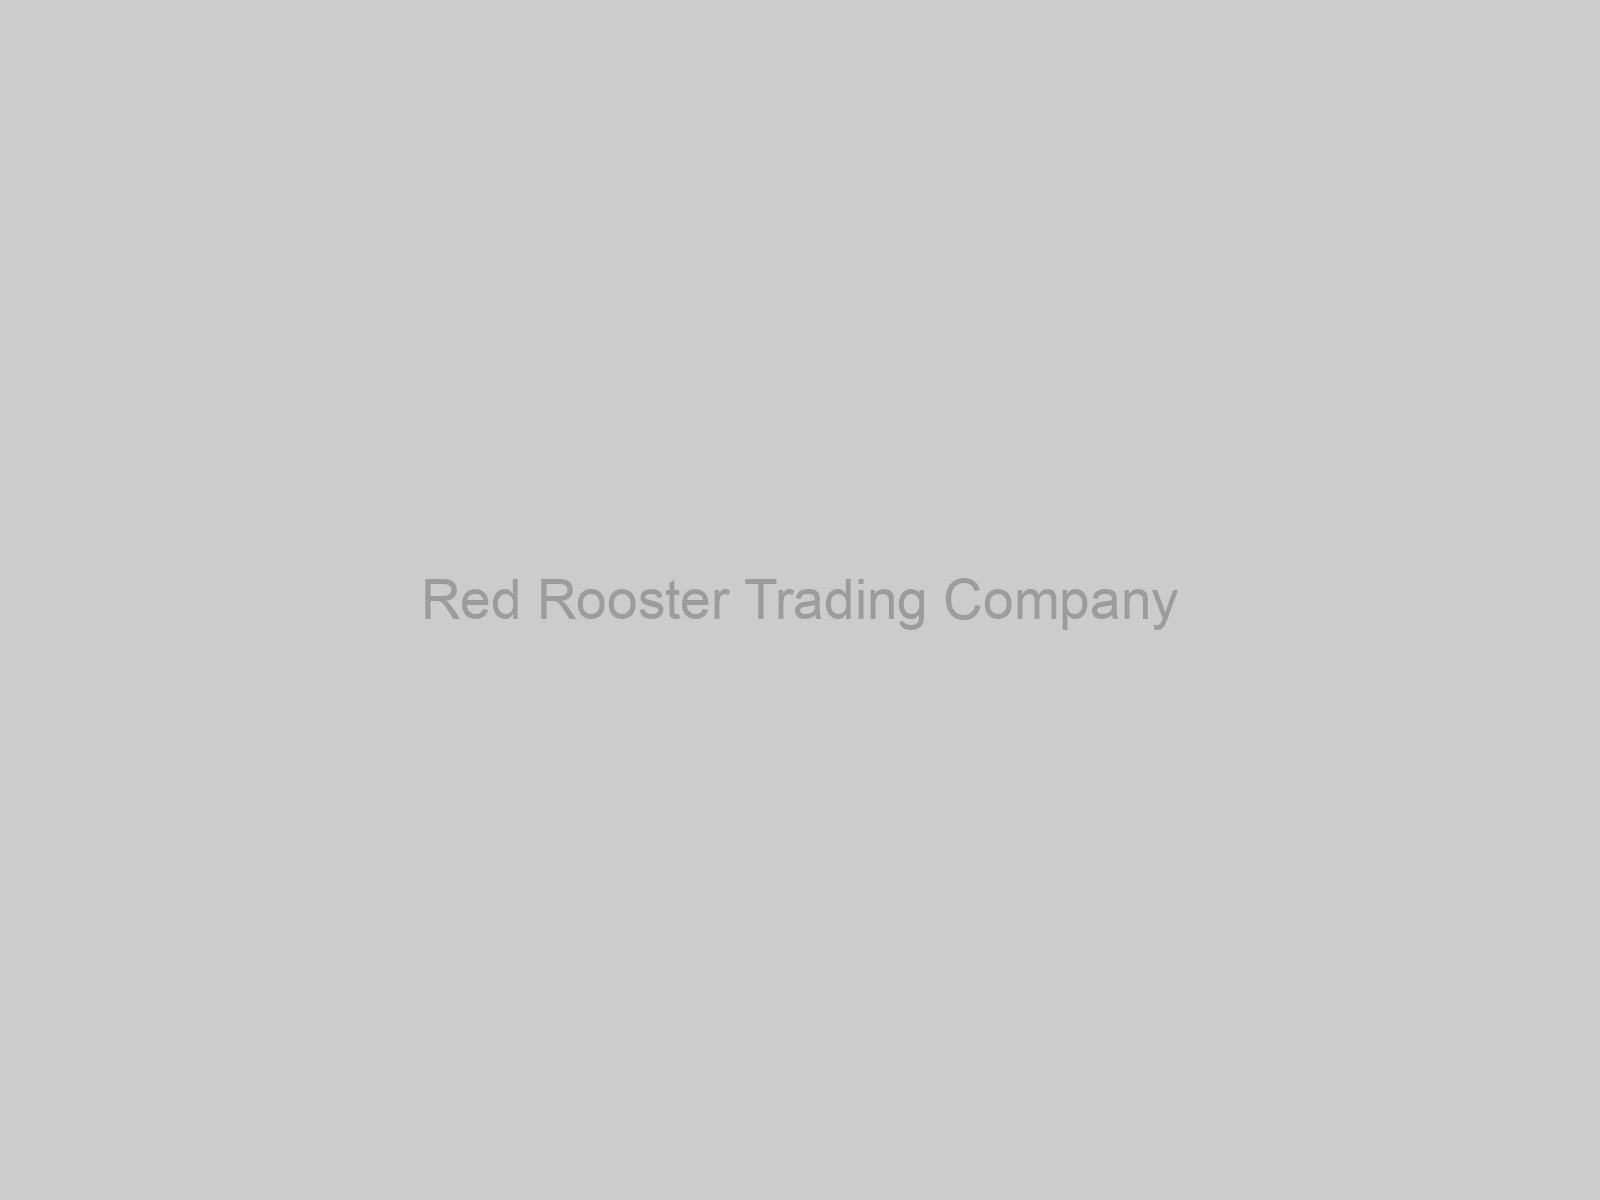 Red Rooster Trading Company